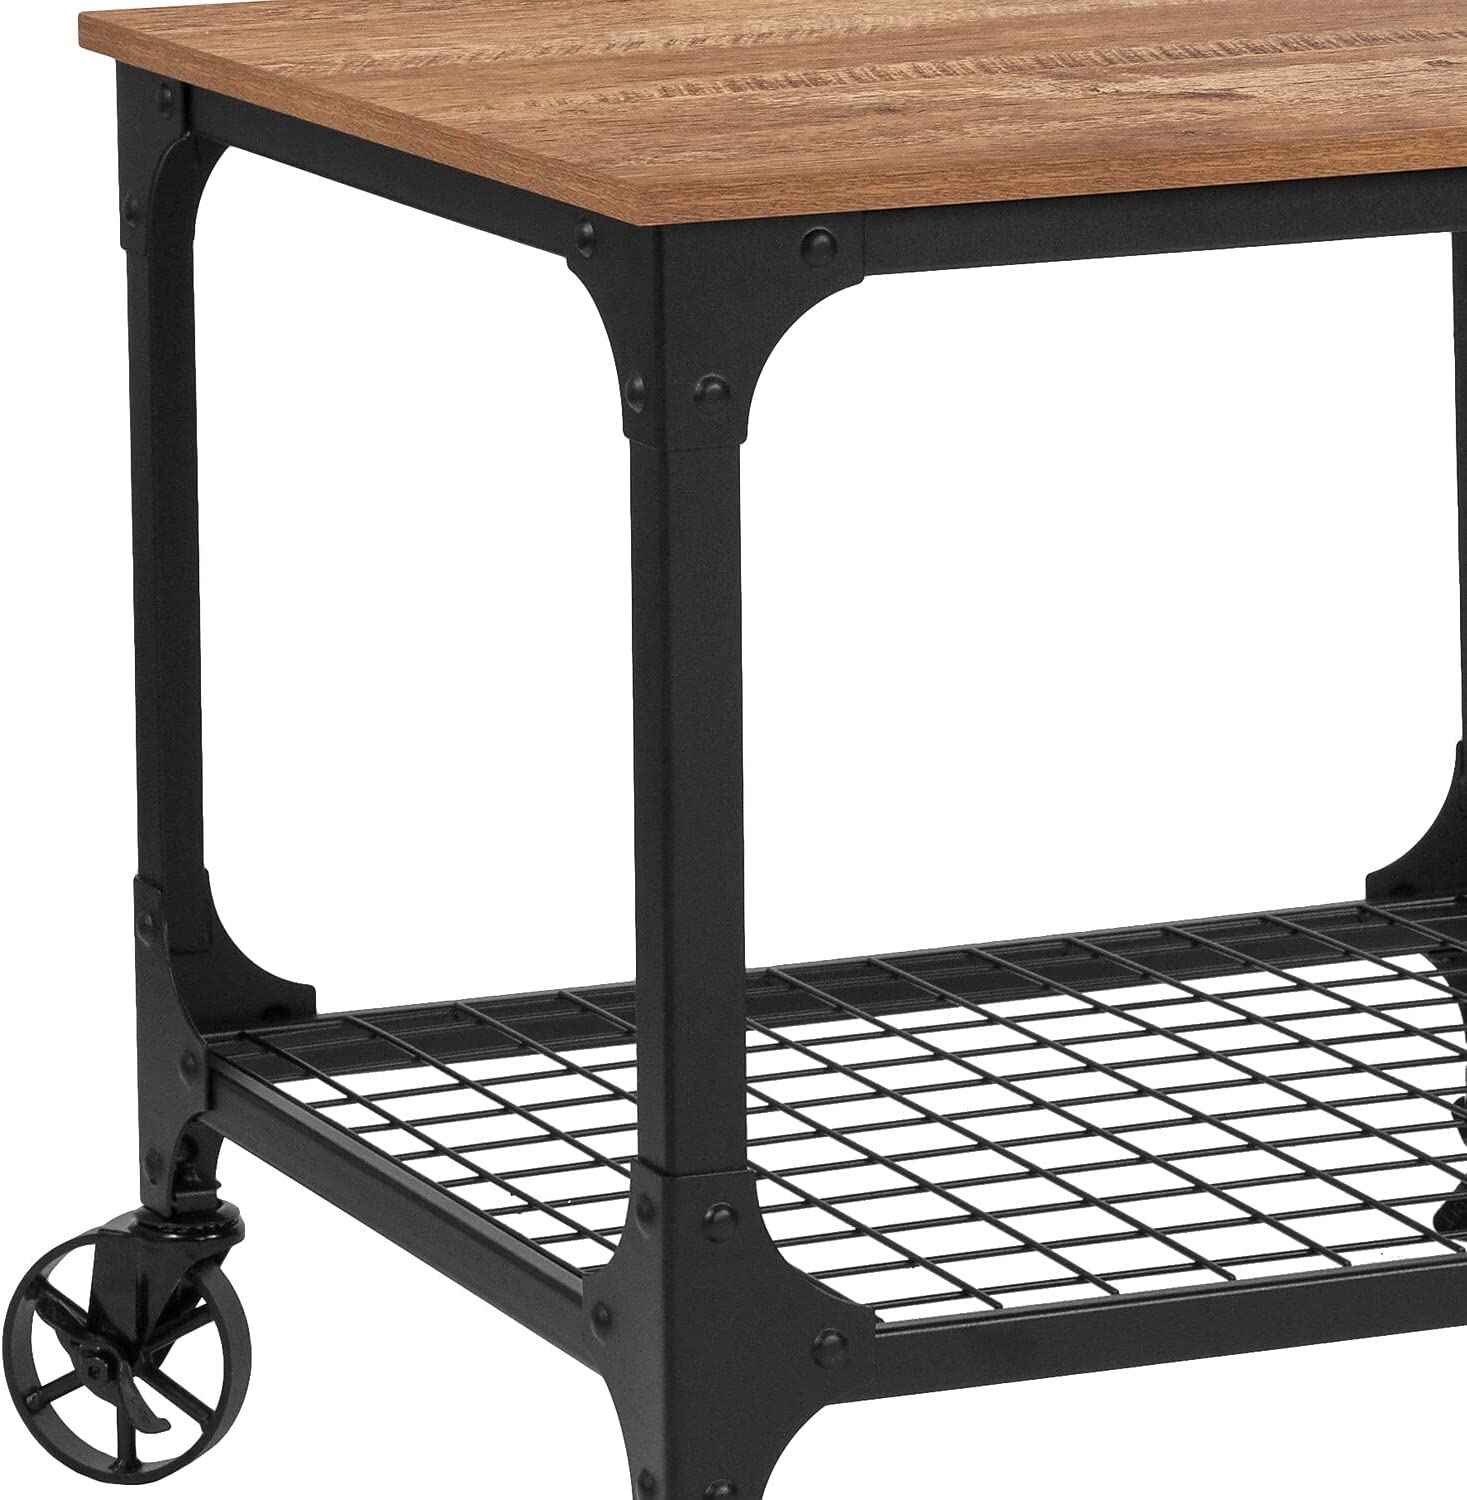 Flash Furniture Rustic Grant Park Wood Grain And Industrial Iron Kitchen Serving And Bar Cart, One Size